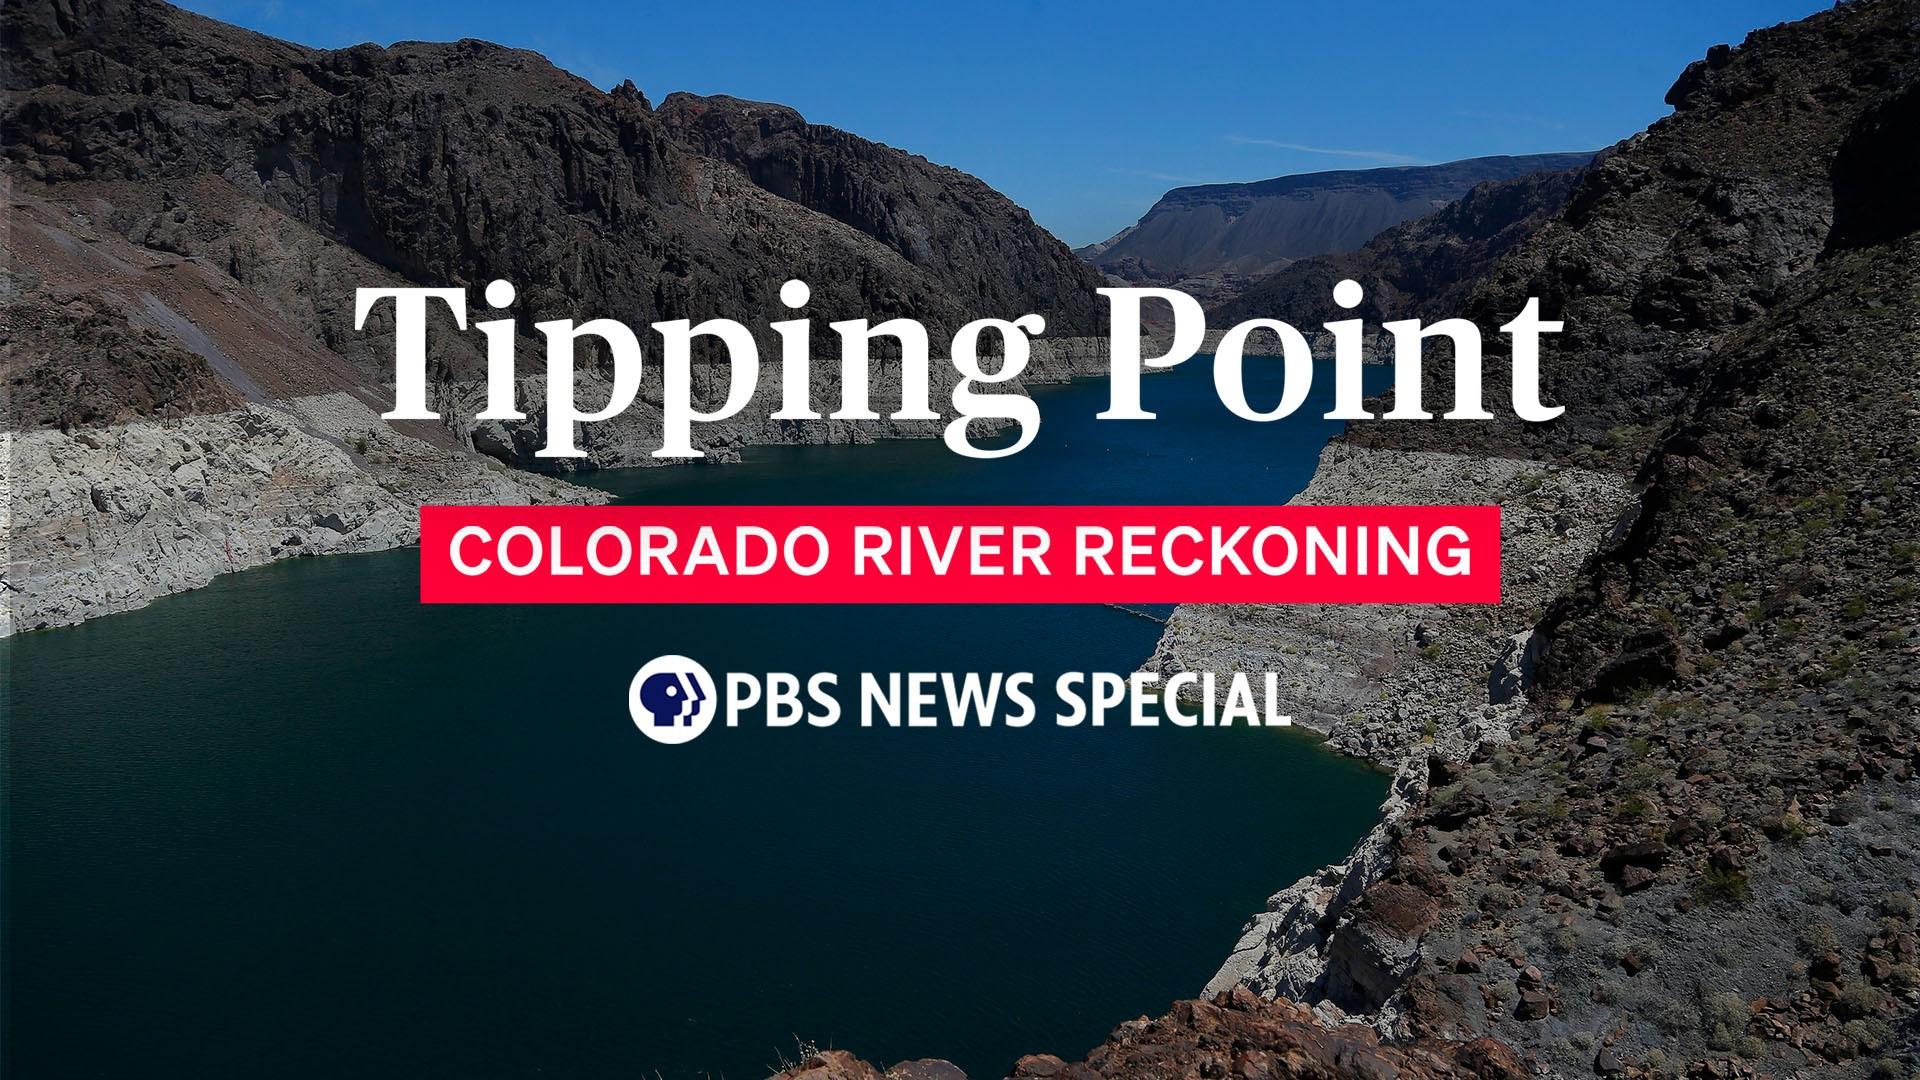 PBS News Hour: Tipping Point: Colorado Rver Reckoning